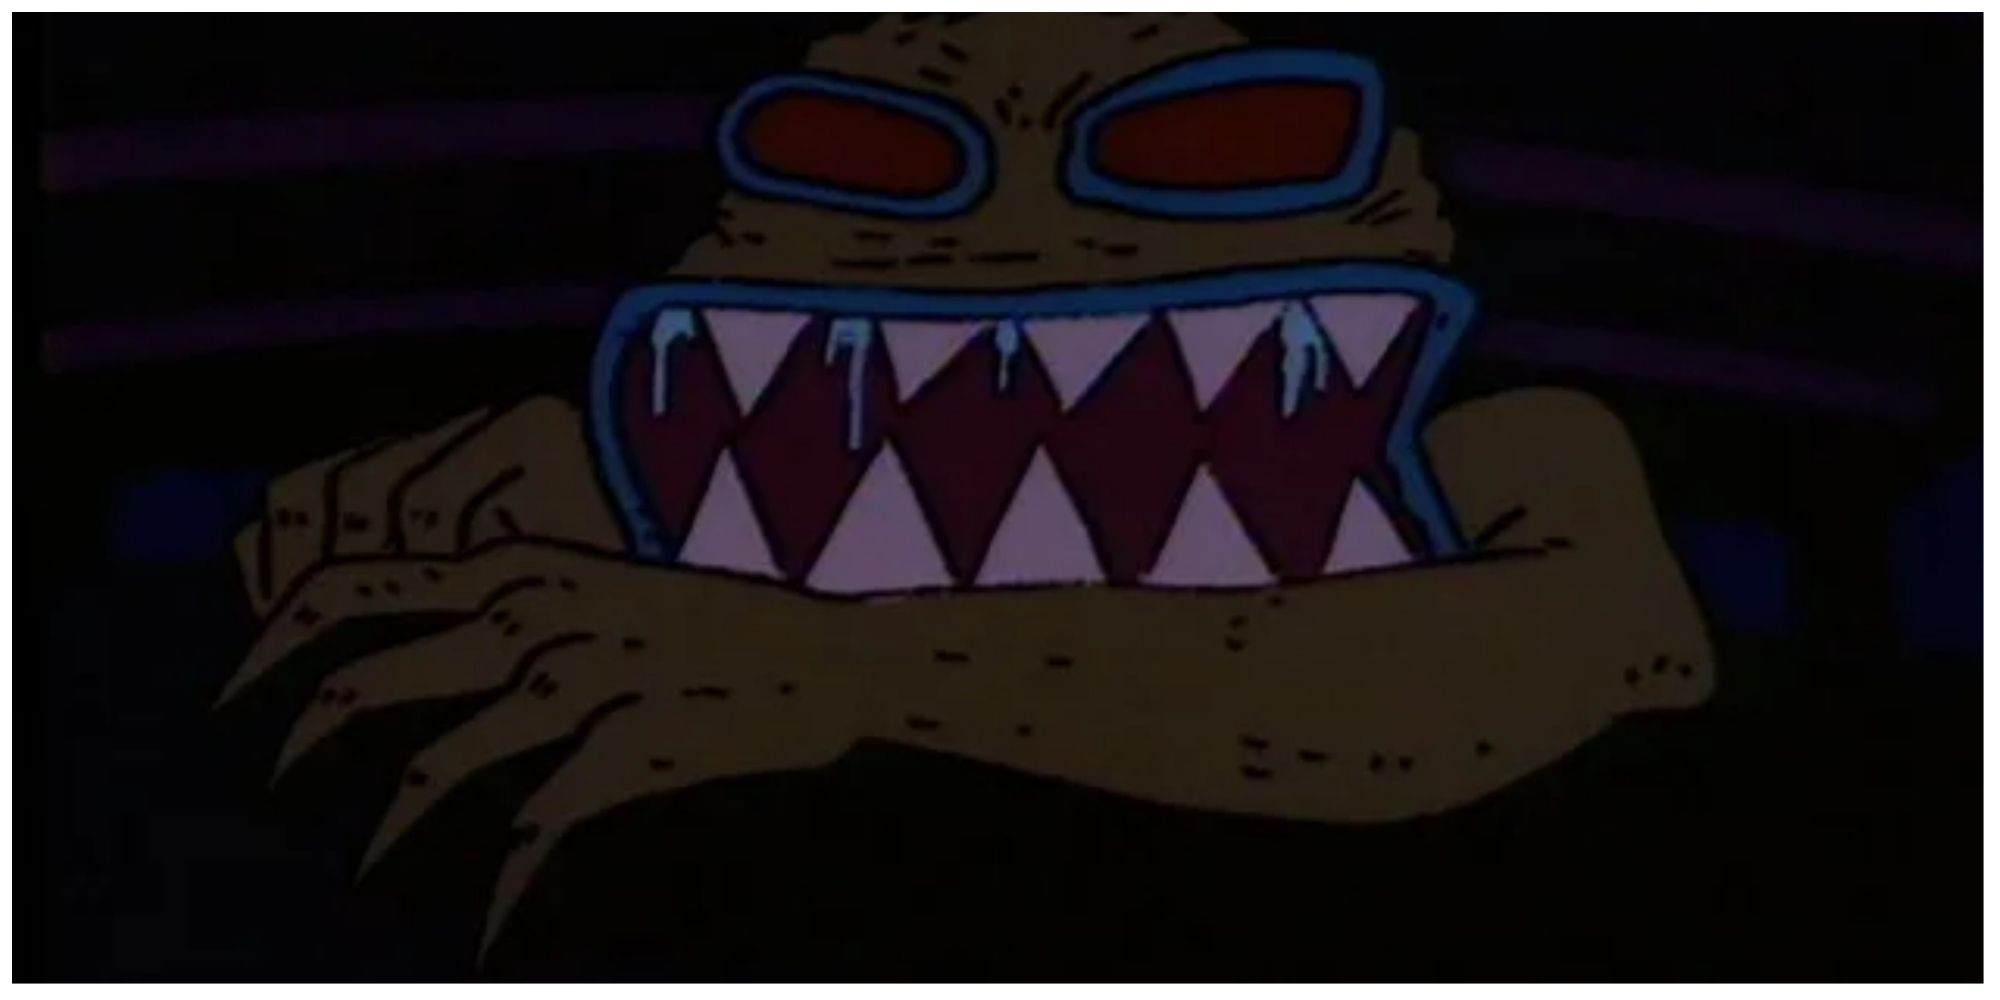 The monster under Chuckie's bed in Rugrats